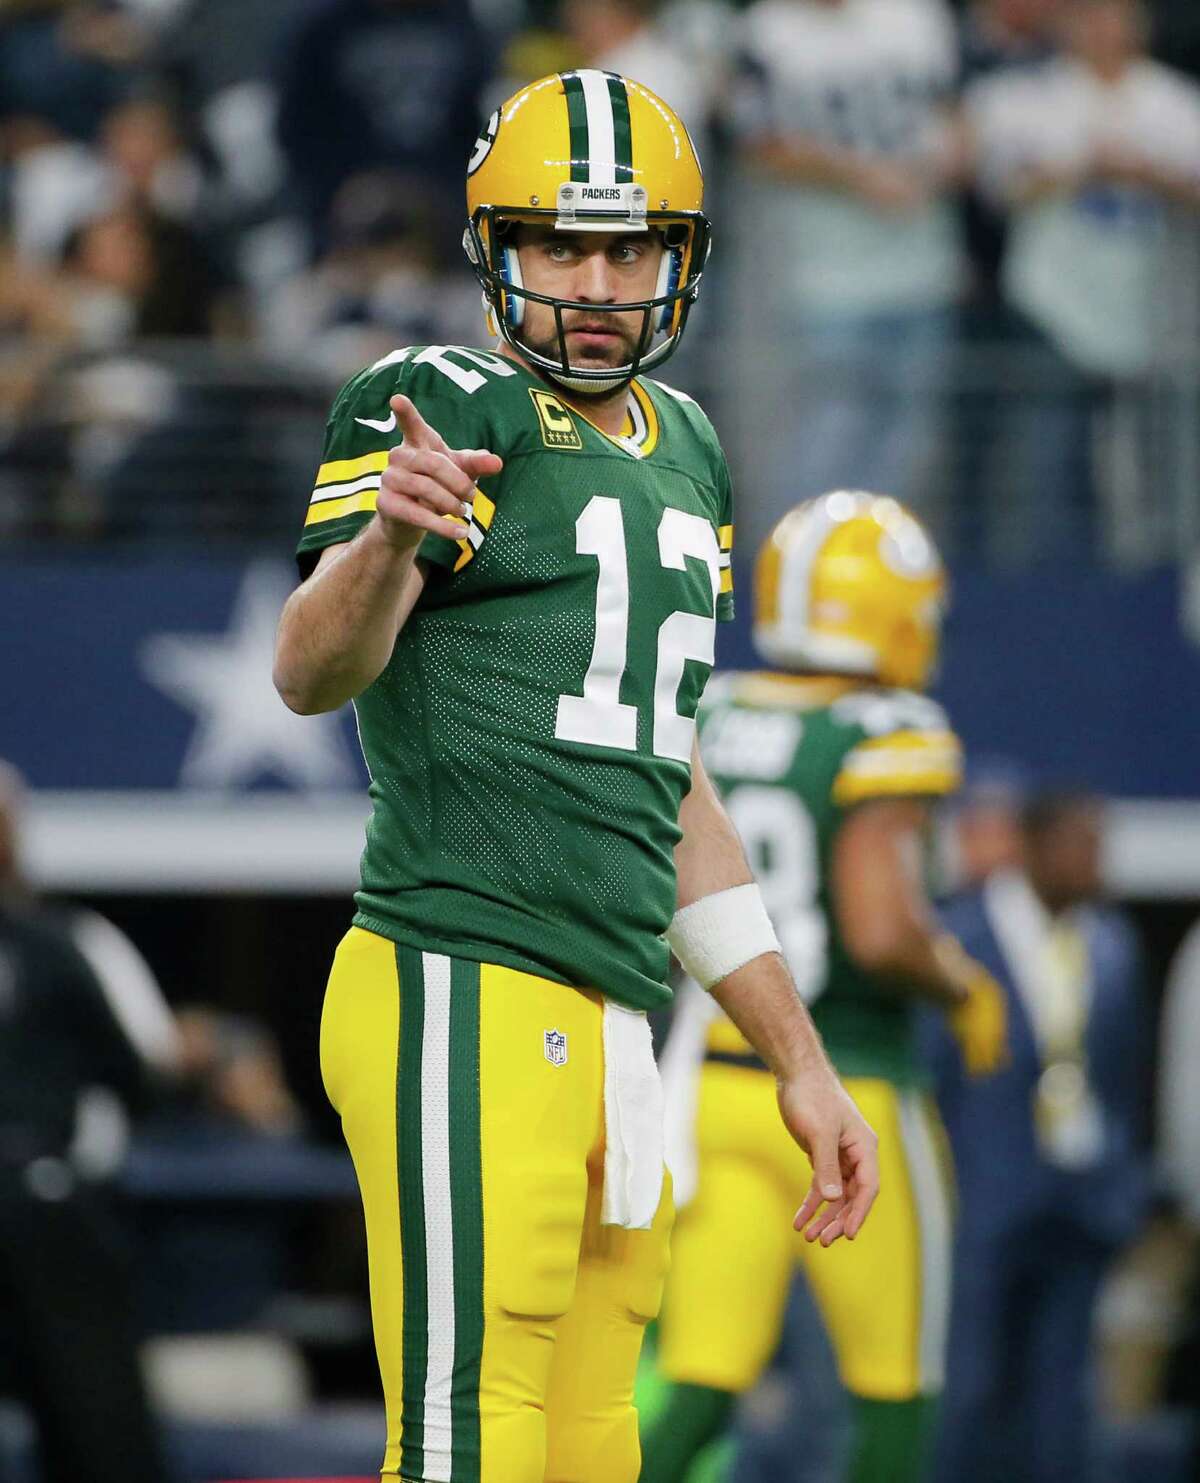 Aaron Rodgers has 24 touchdown passes, one interception and a 117.9 rating during Green Bay's current eight-game winning streak.